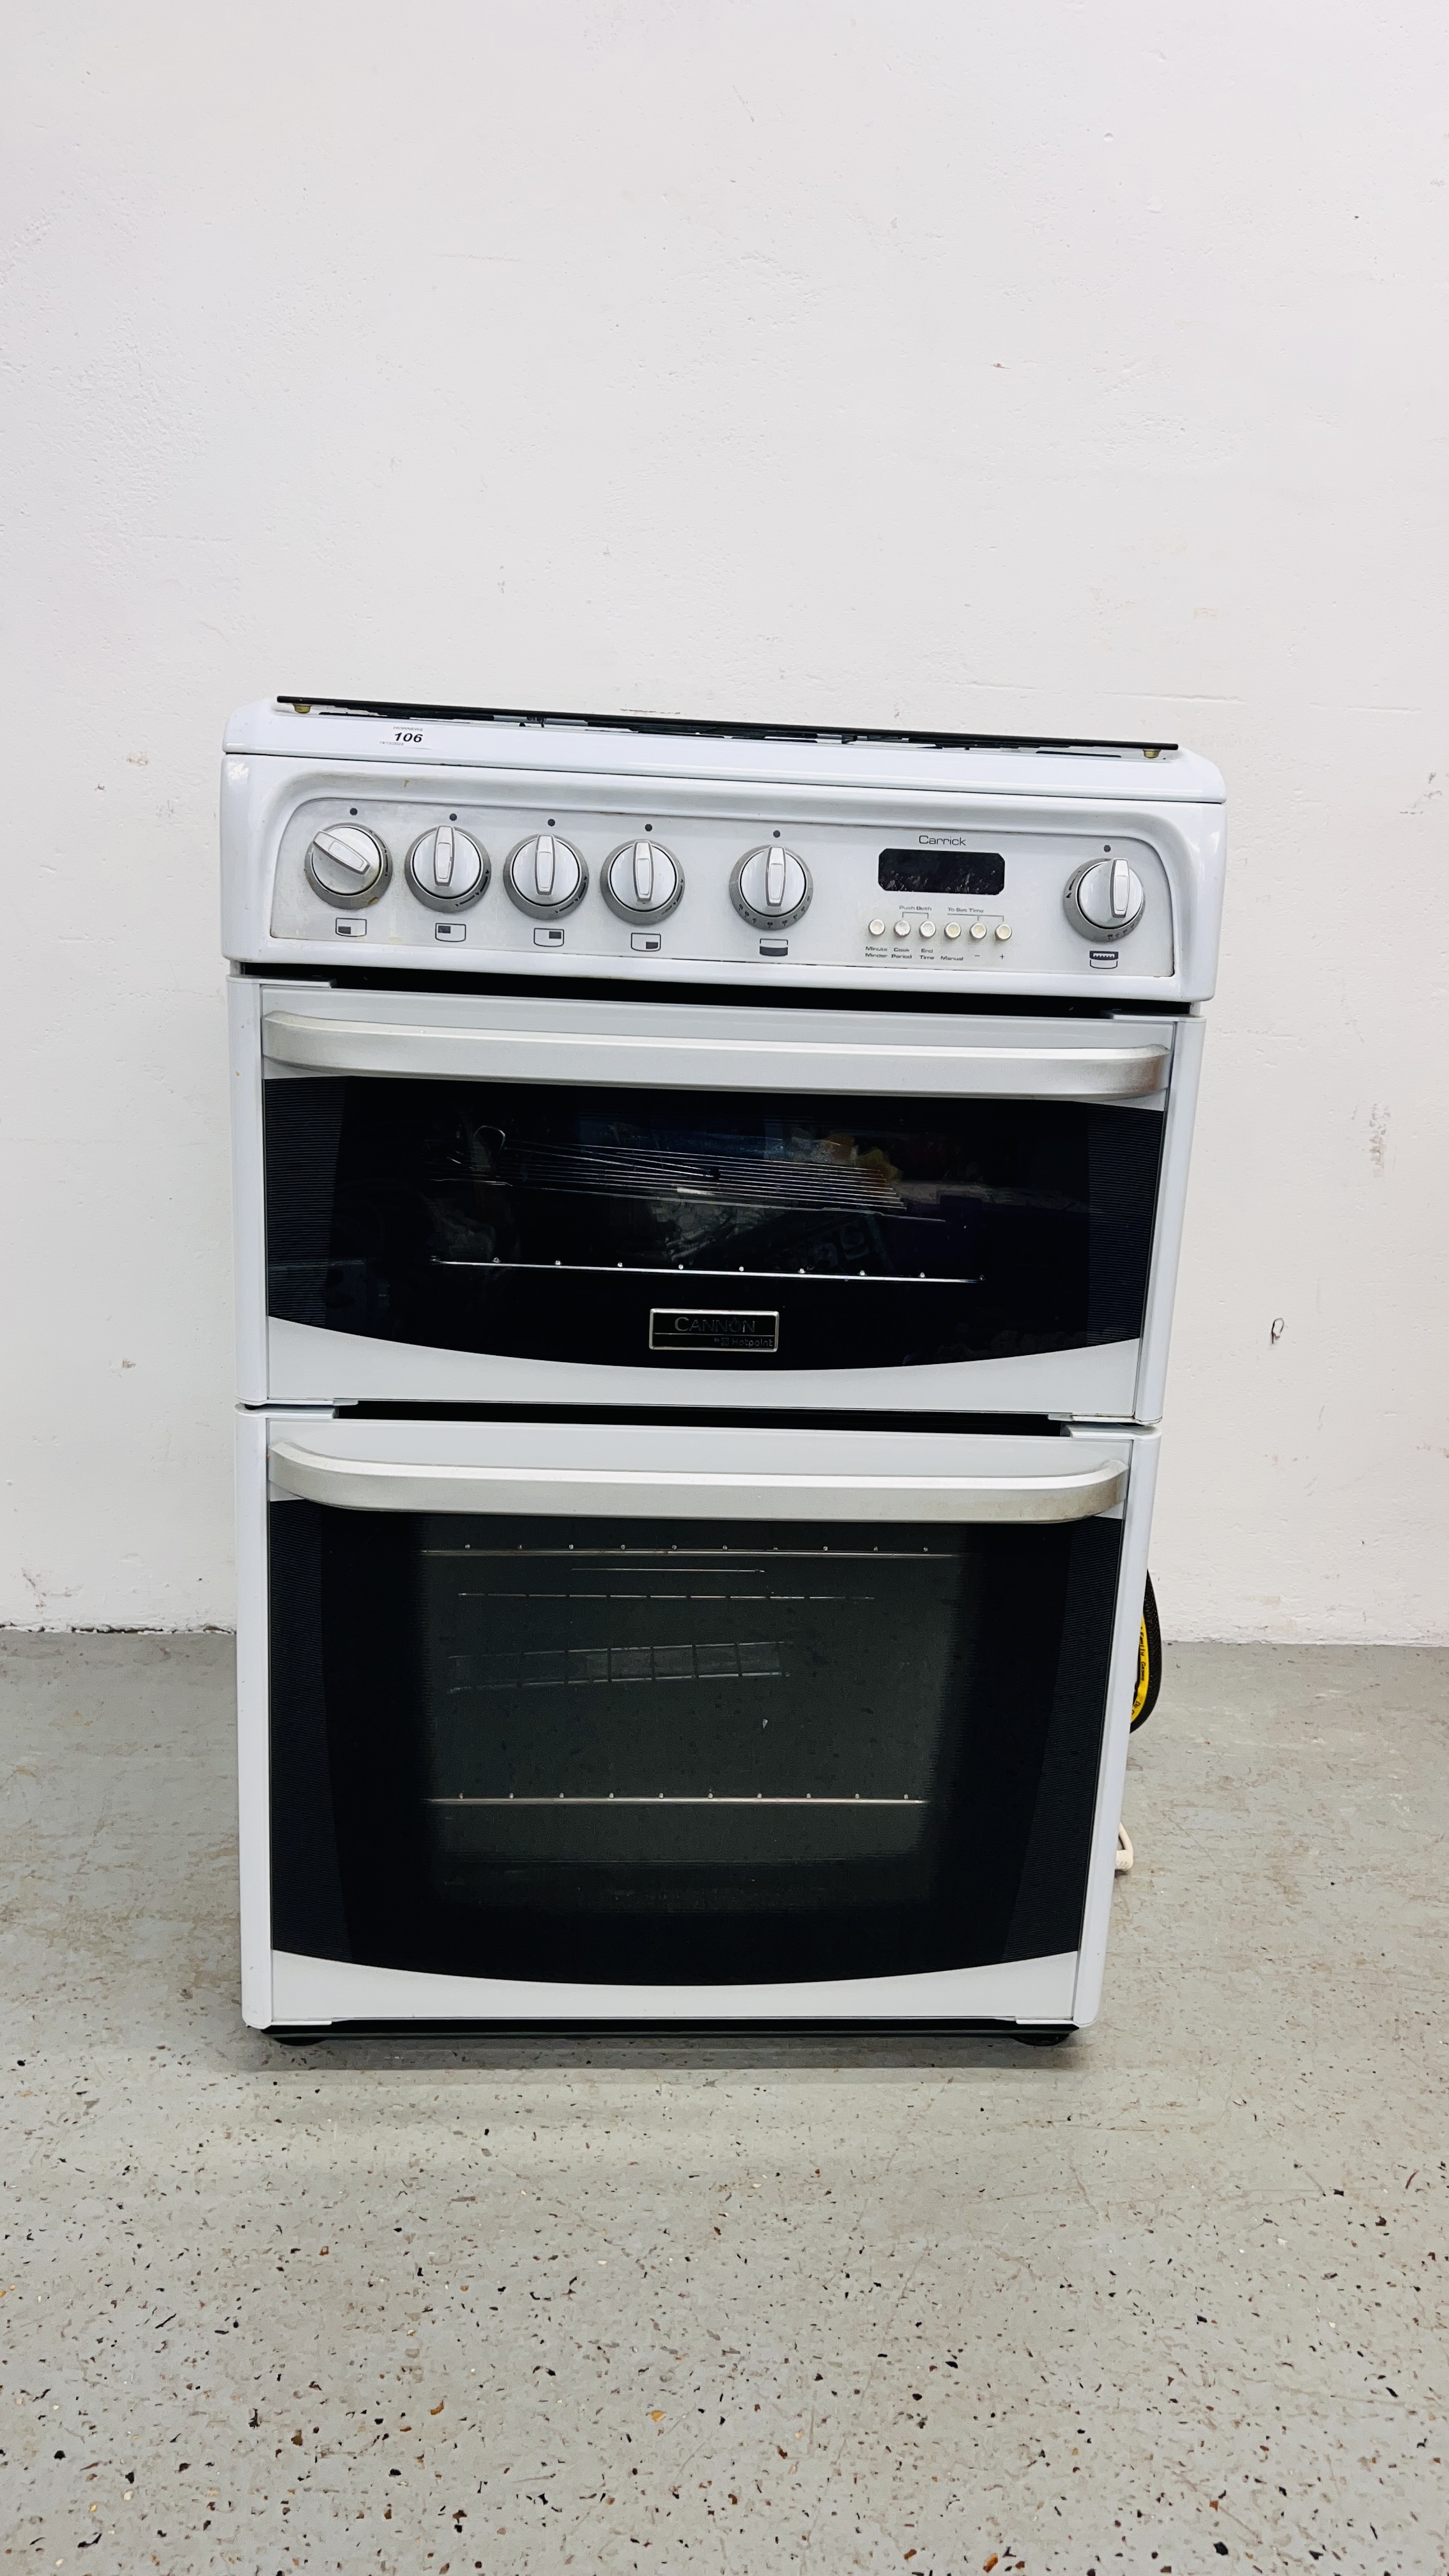 CANON HOTPOINT "CARRICK" MAINS GAS DOUBLE OVEN SLOT IN COOKER (CONDITION OF SALE TO BE FITTED BY